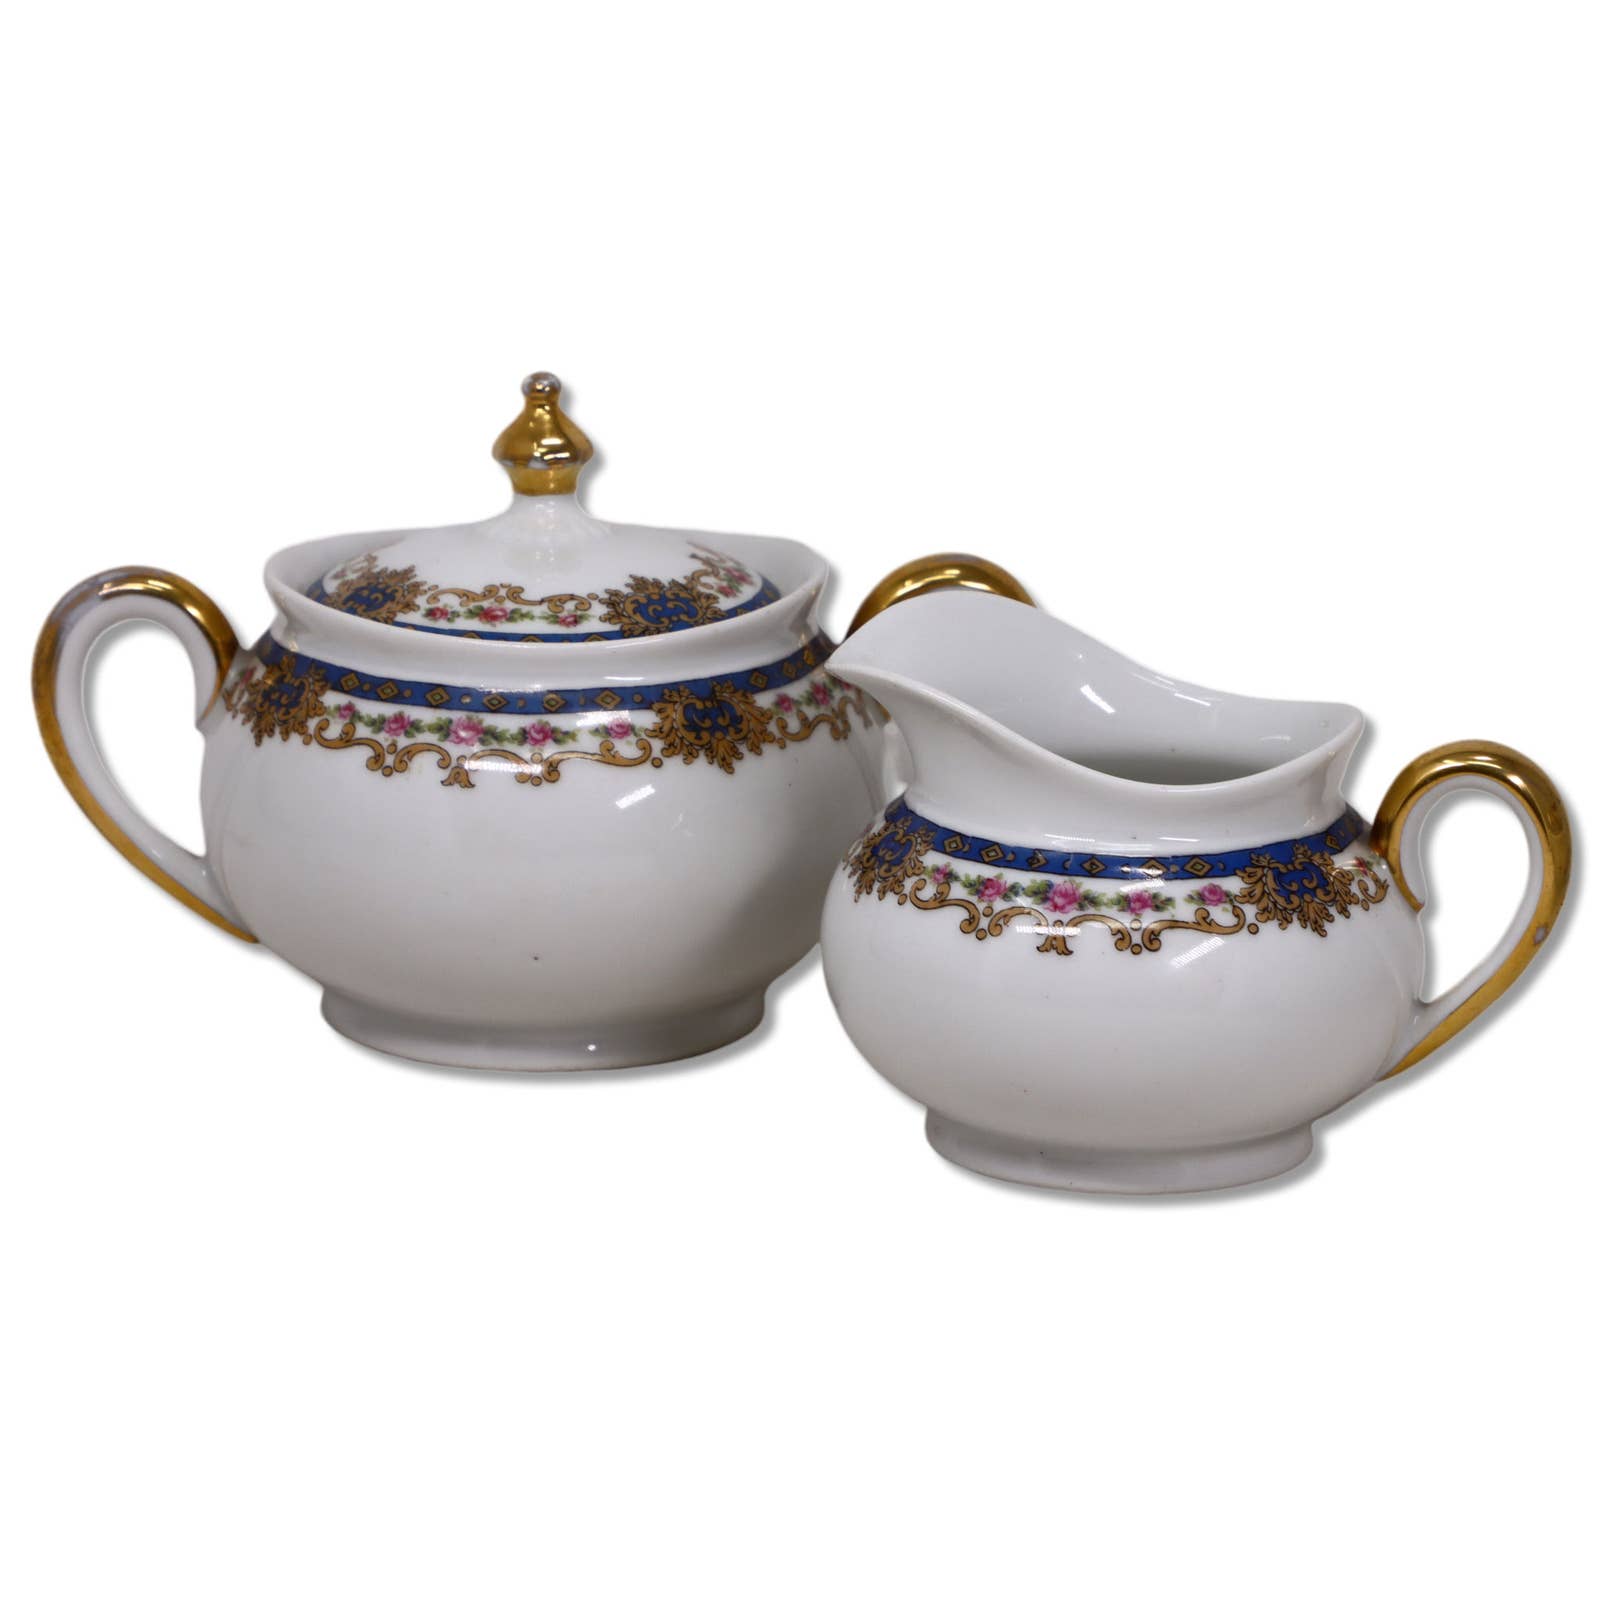 Limoges France LIM487 Sugar Bowl and Creamer Pitcher Antique Early 